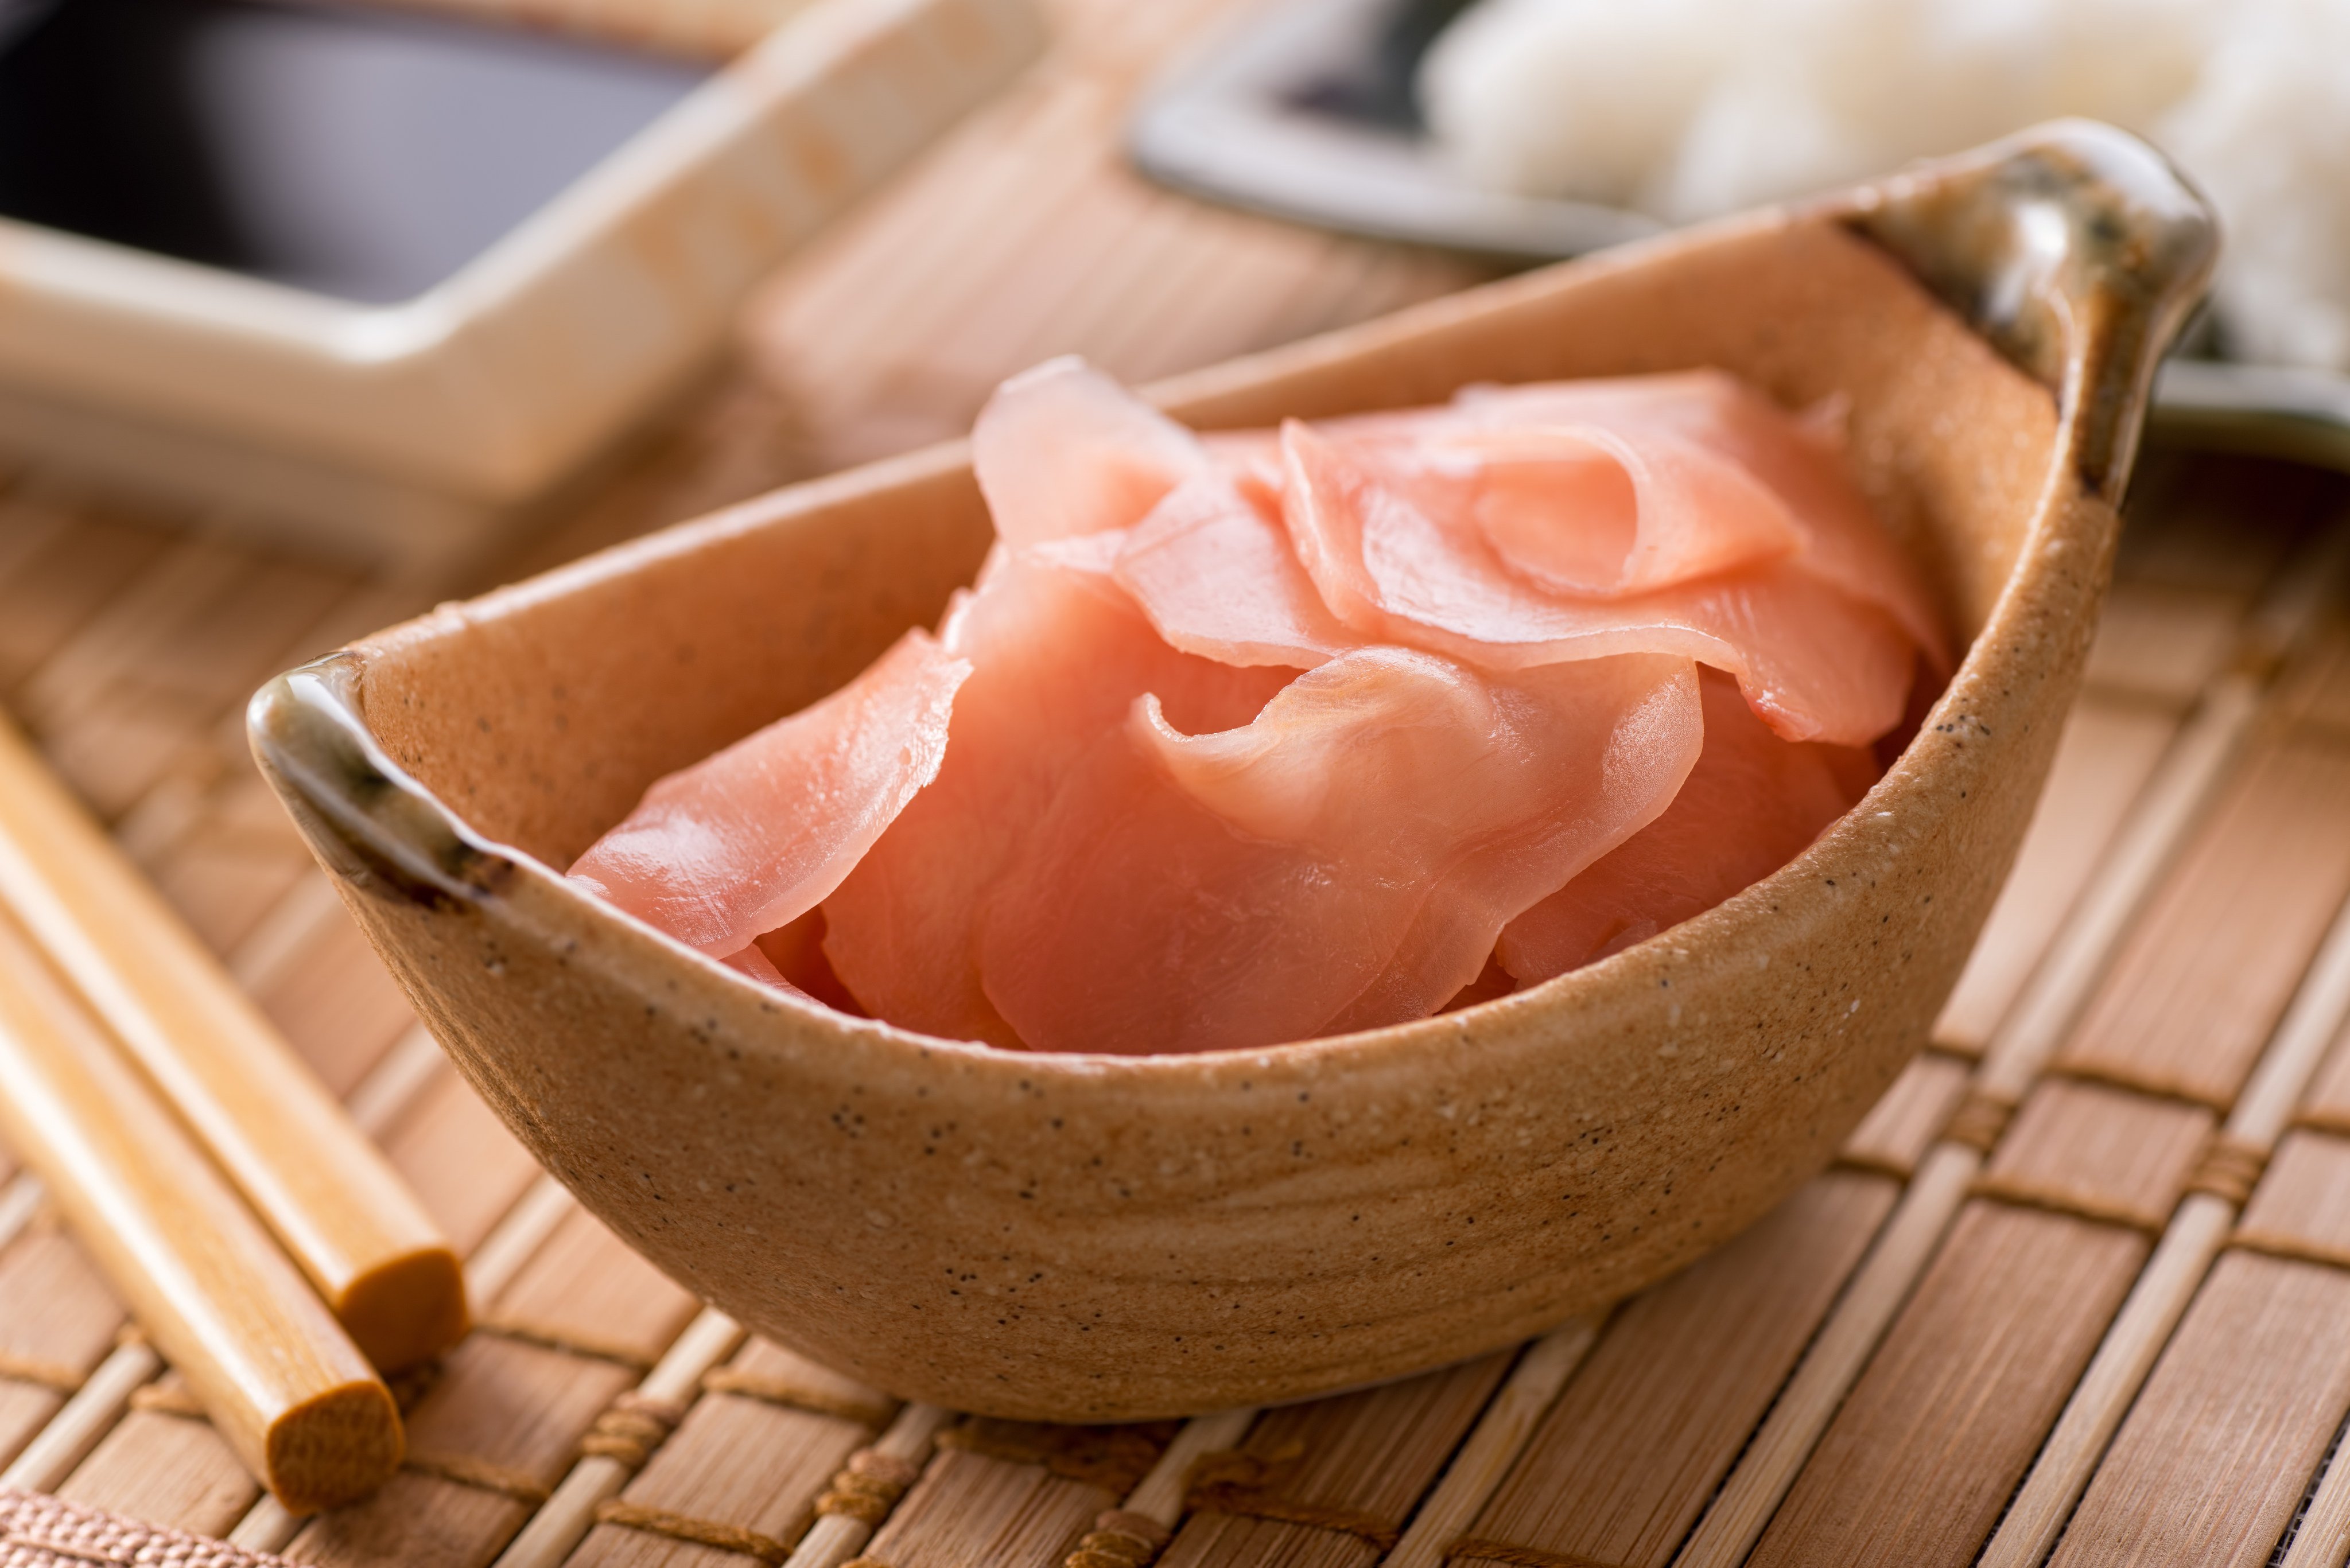 Pickled ginger slices are typically served to accompany sushi. Raw ginger benefits health in a variety of ways, and some, but not all, of these are preserved when the root is pickled. Shutterstock Images